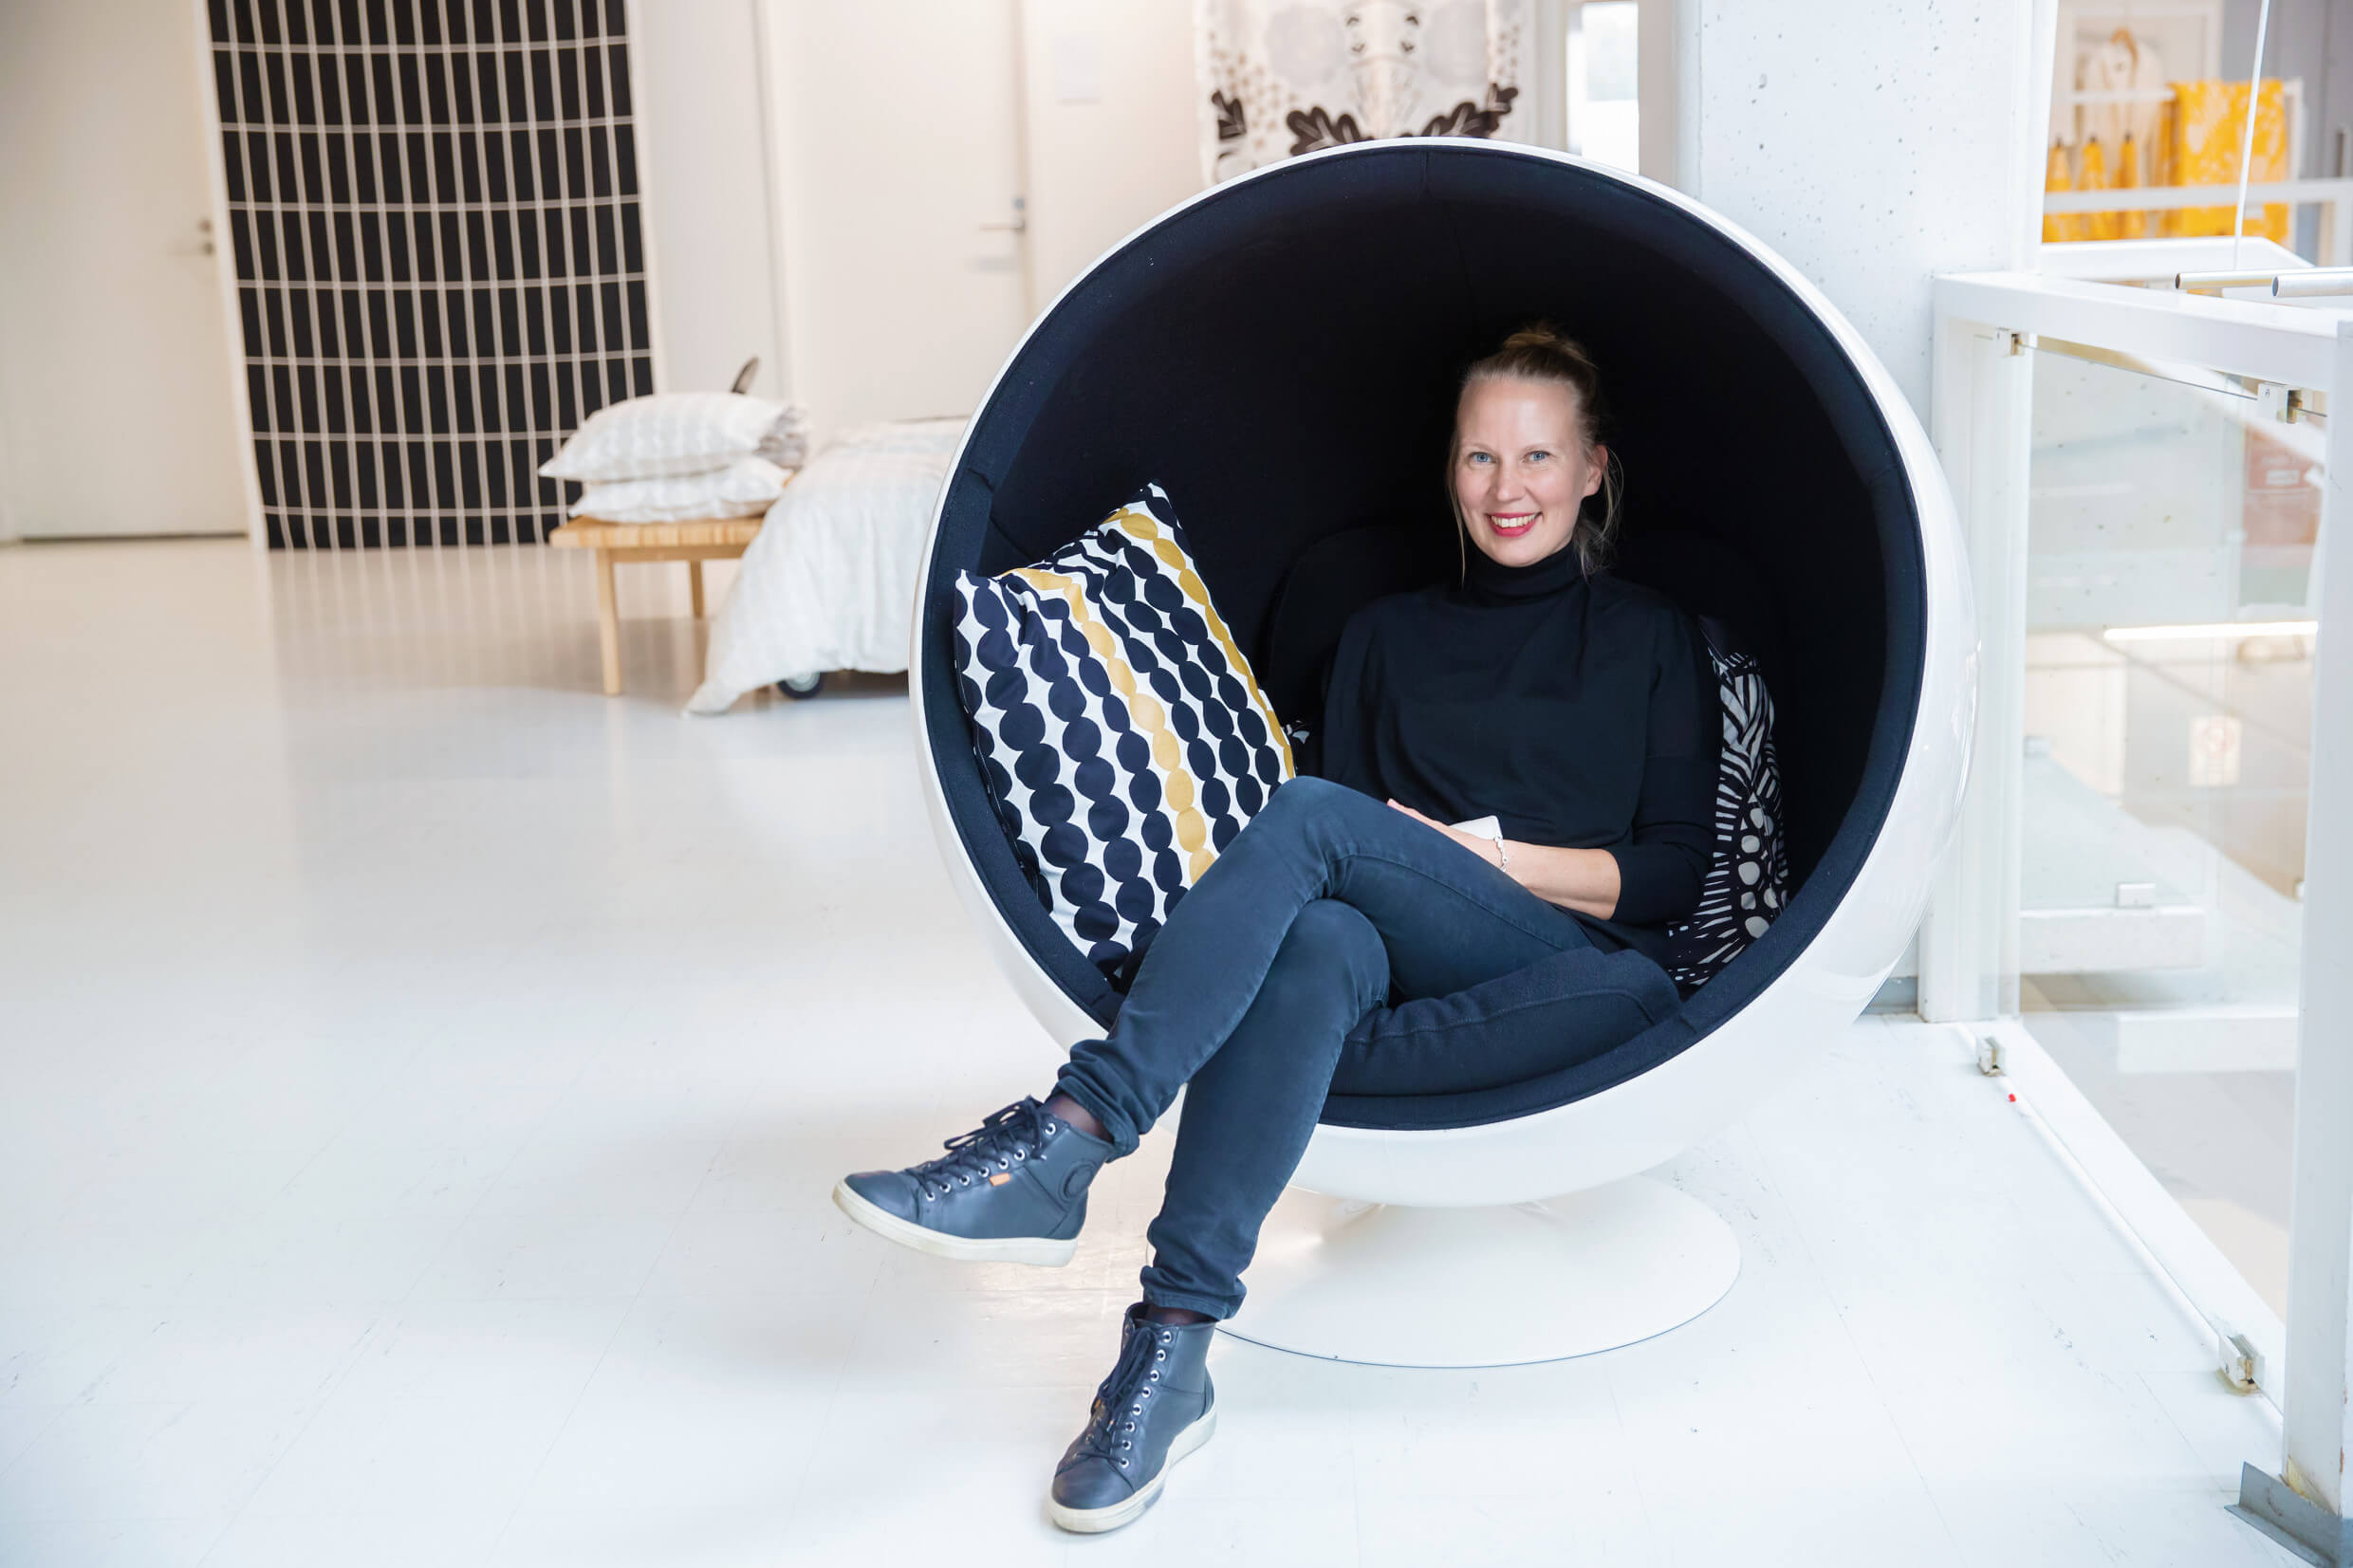 A woman wearing jeans sits inside a modern egg-shaped chair.